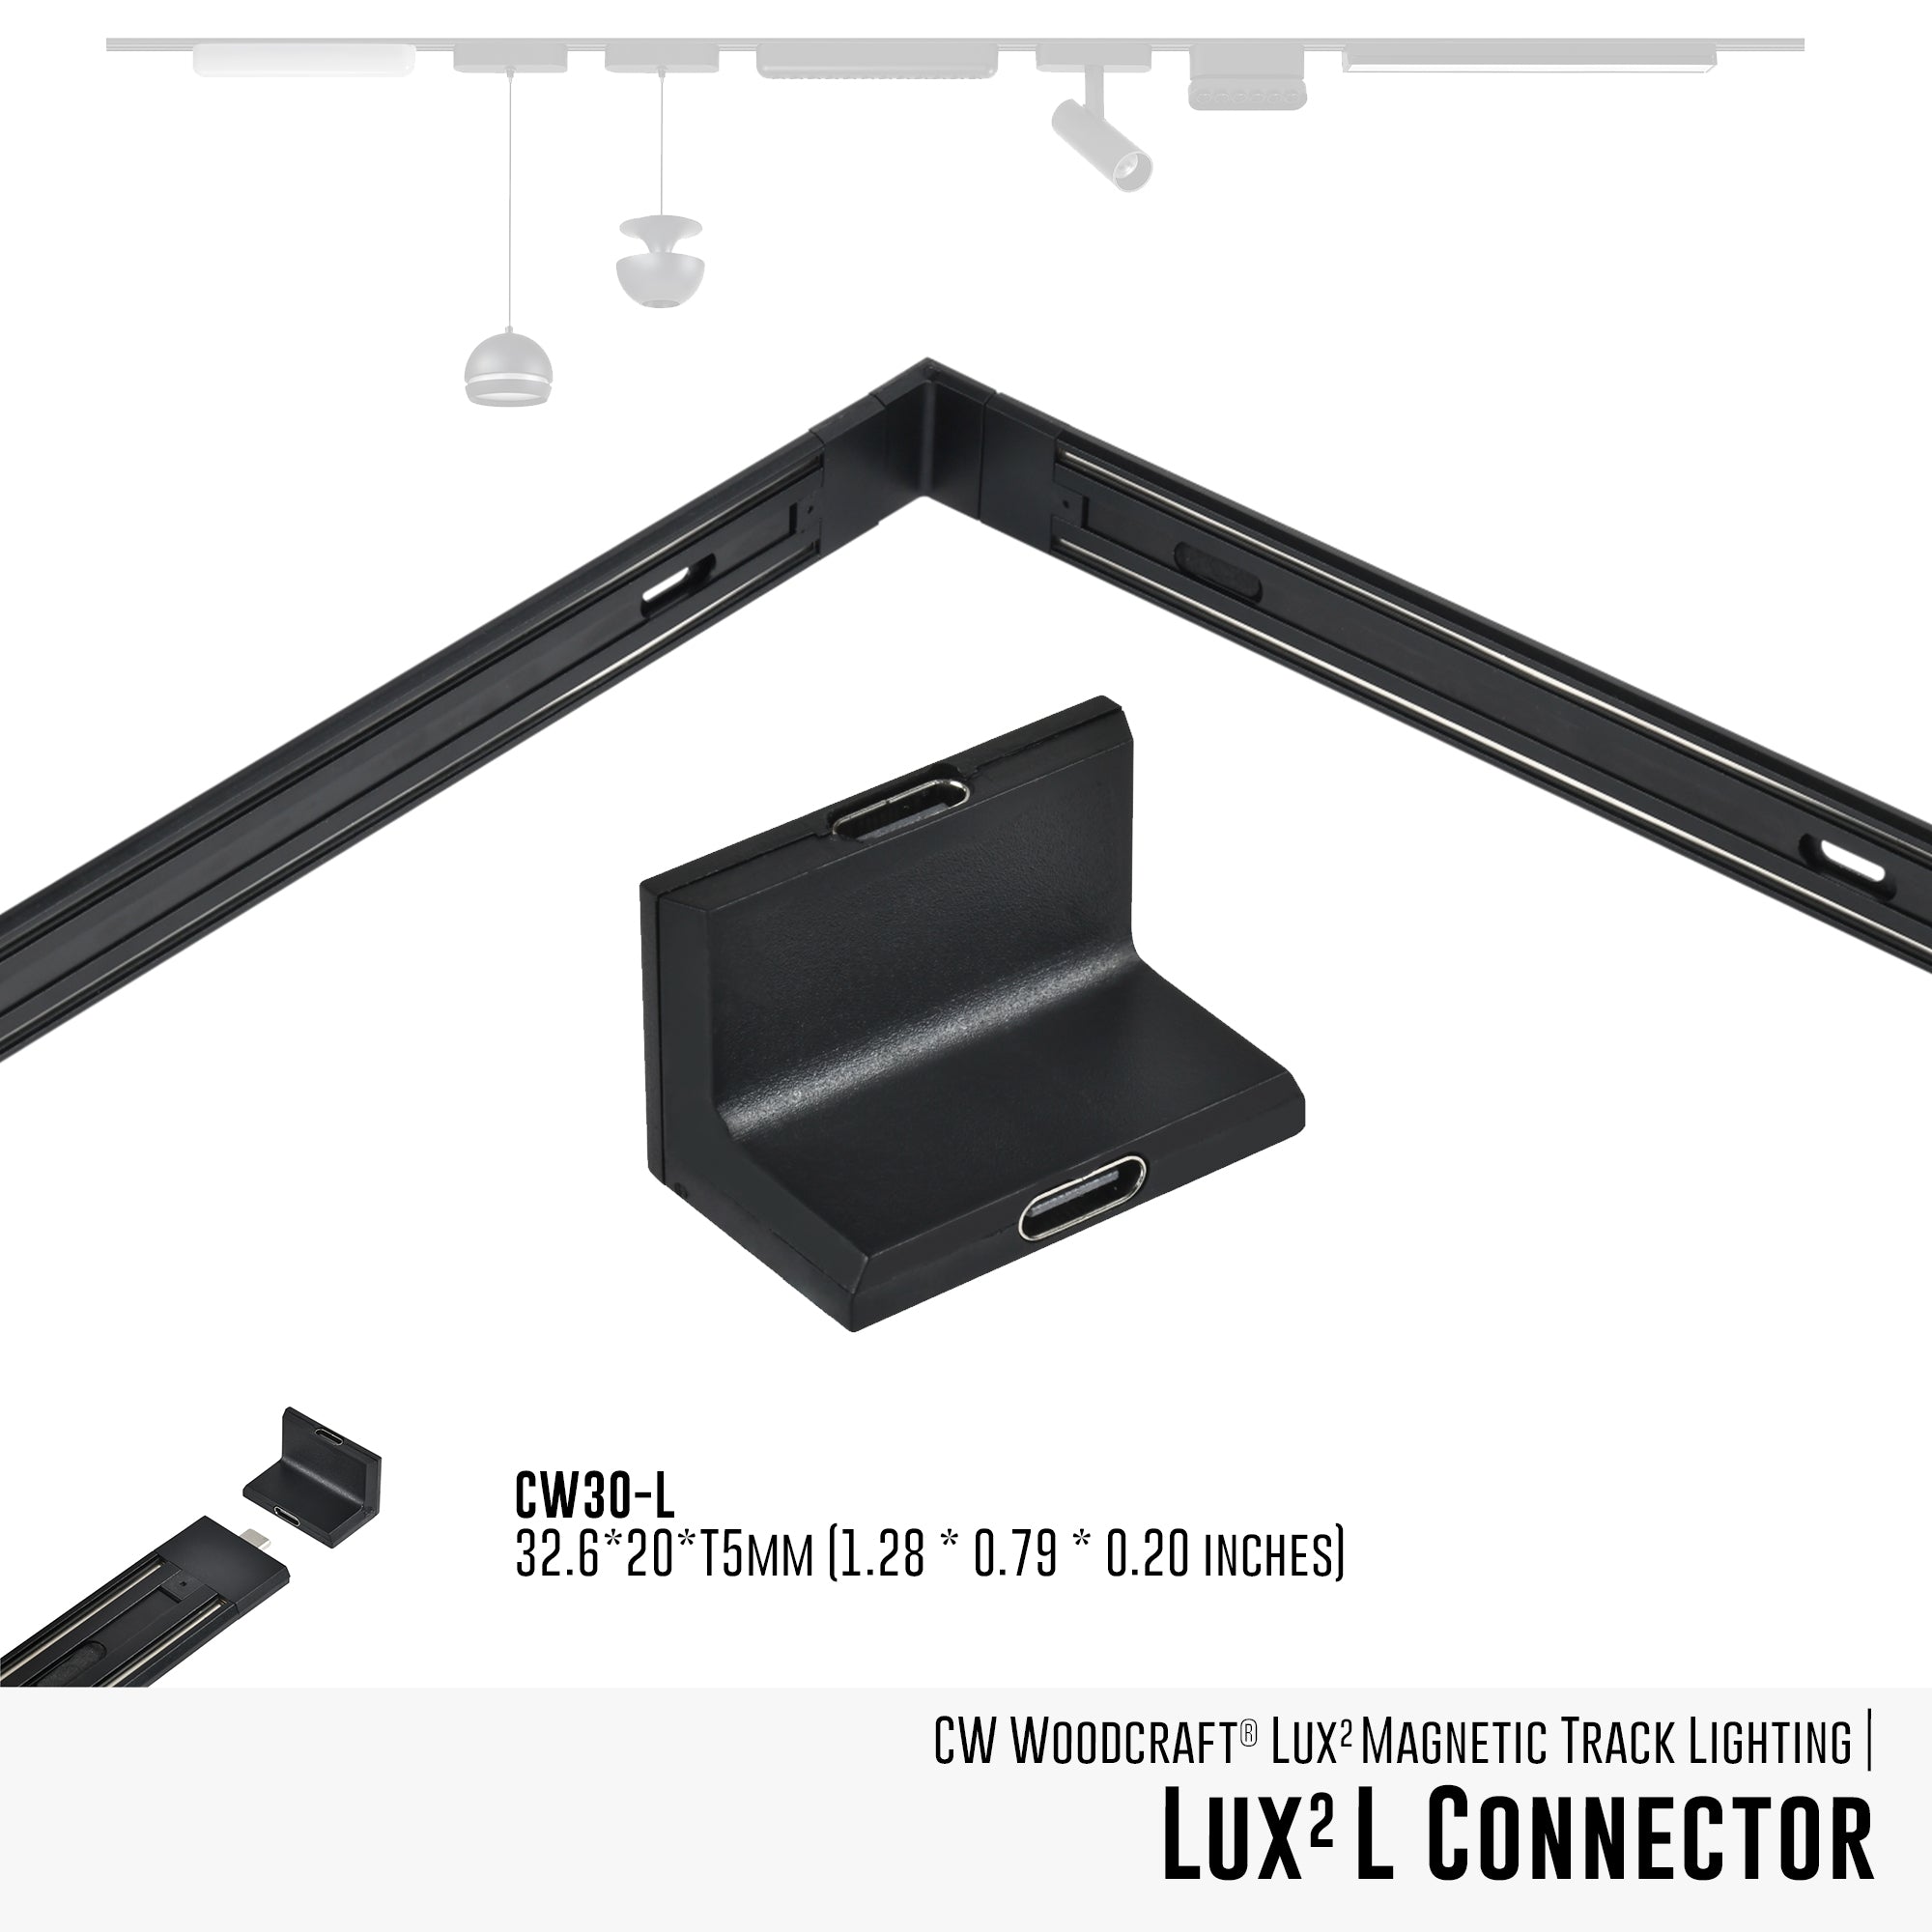 LUX 2 Magnetic Lighting System | Connectors